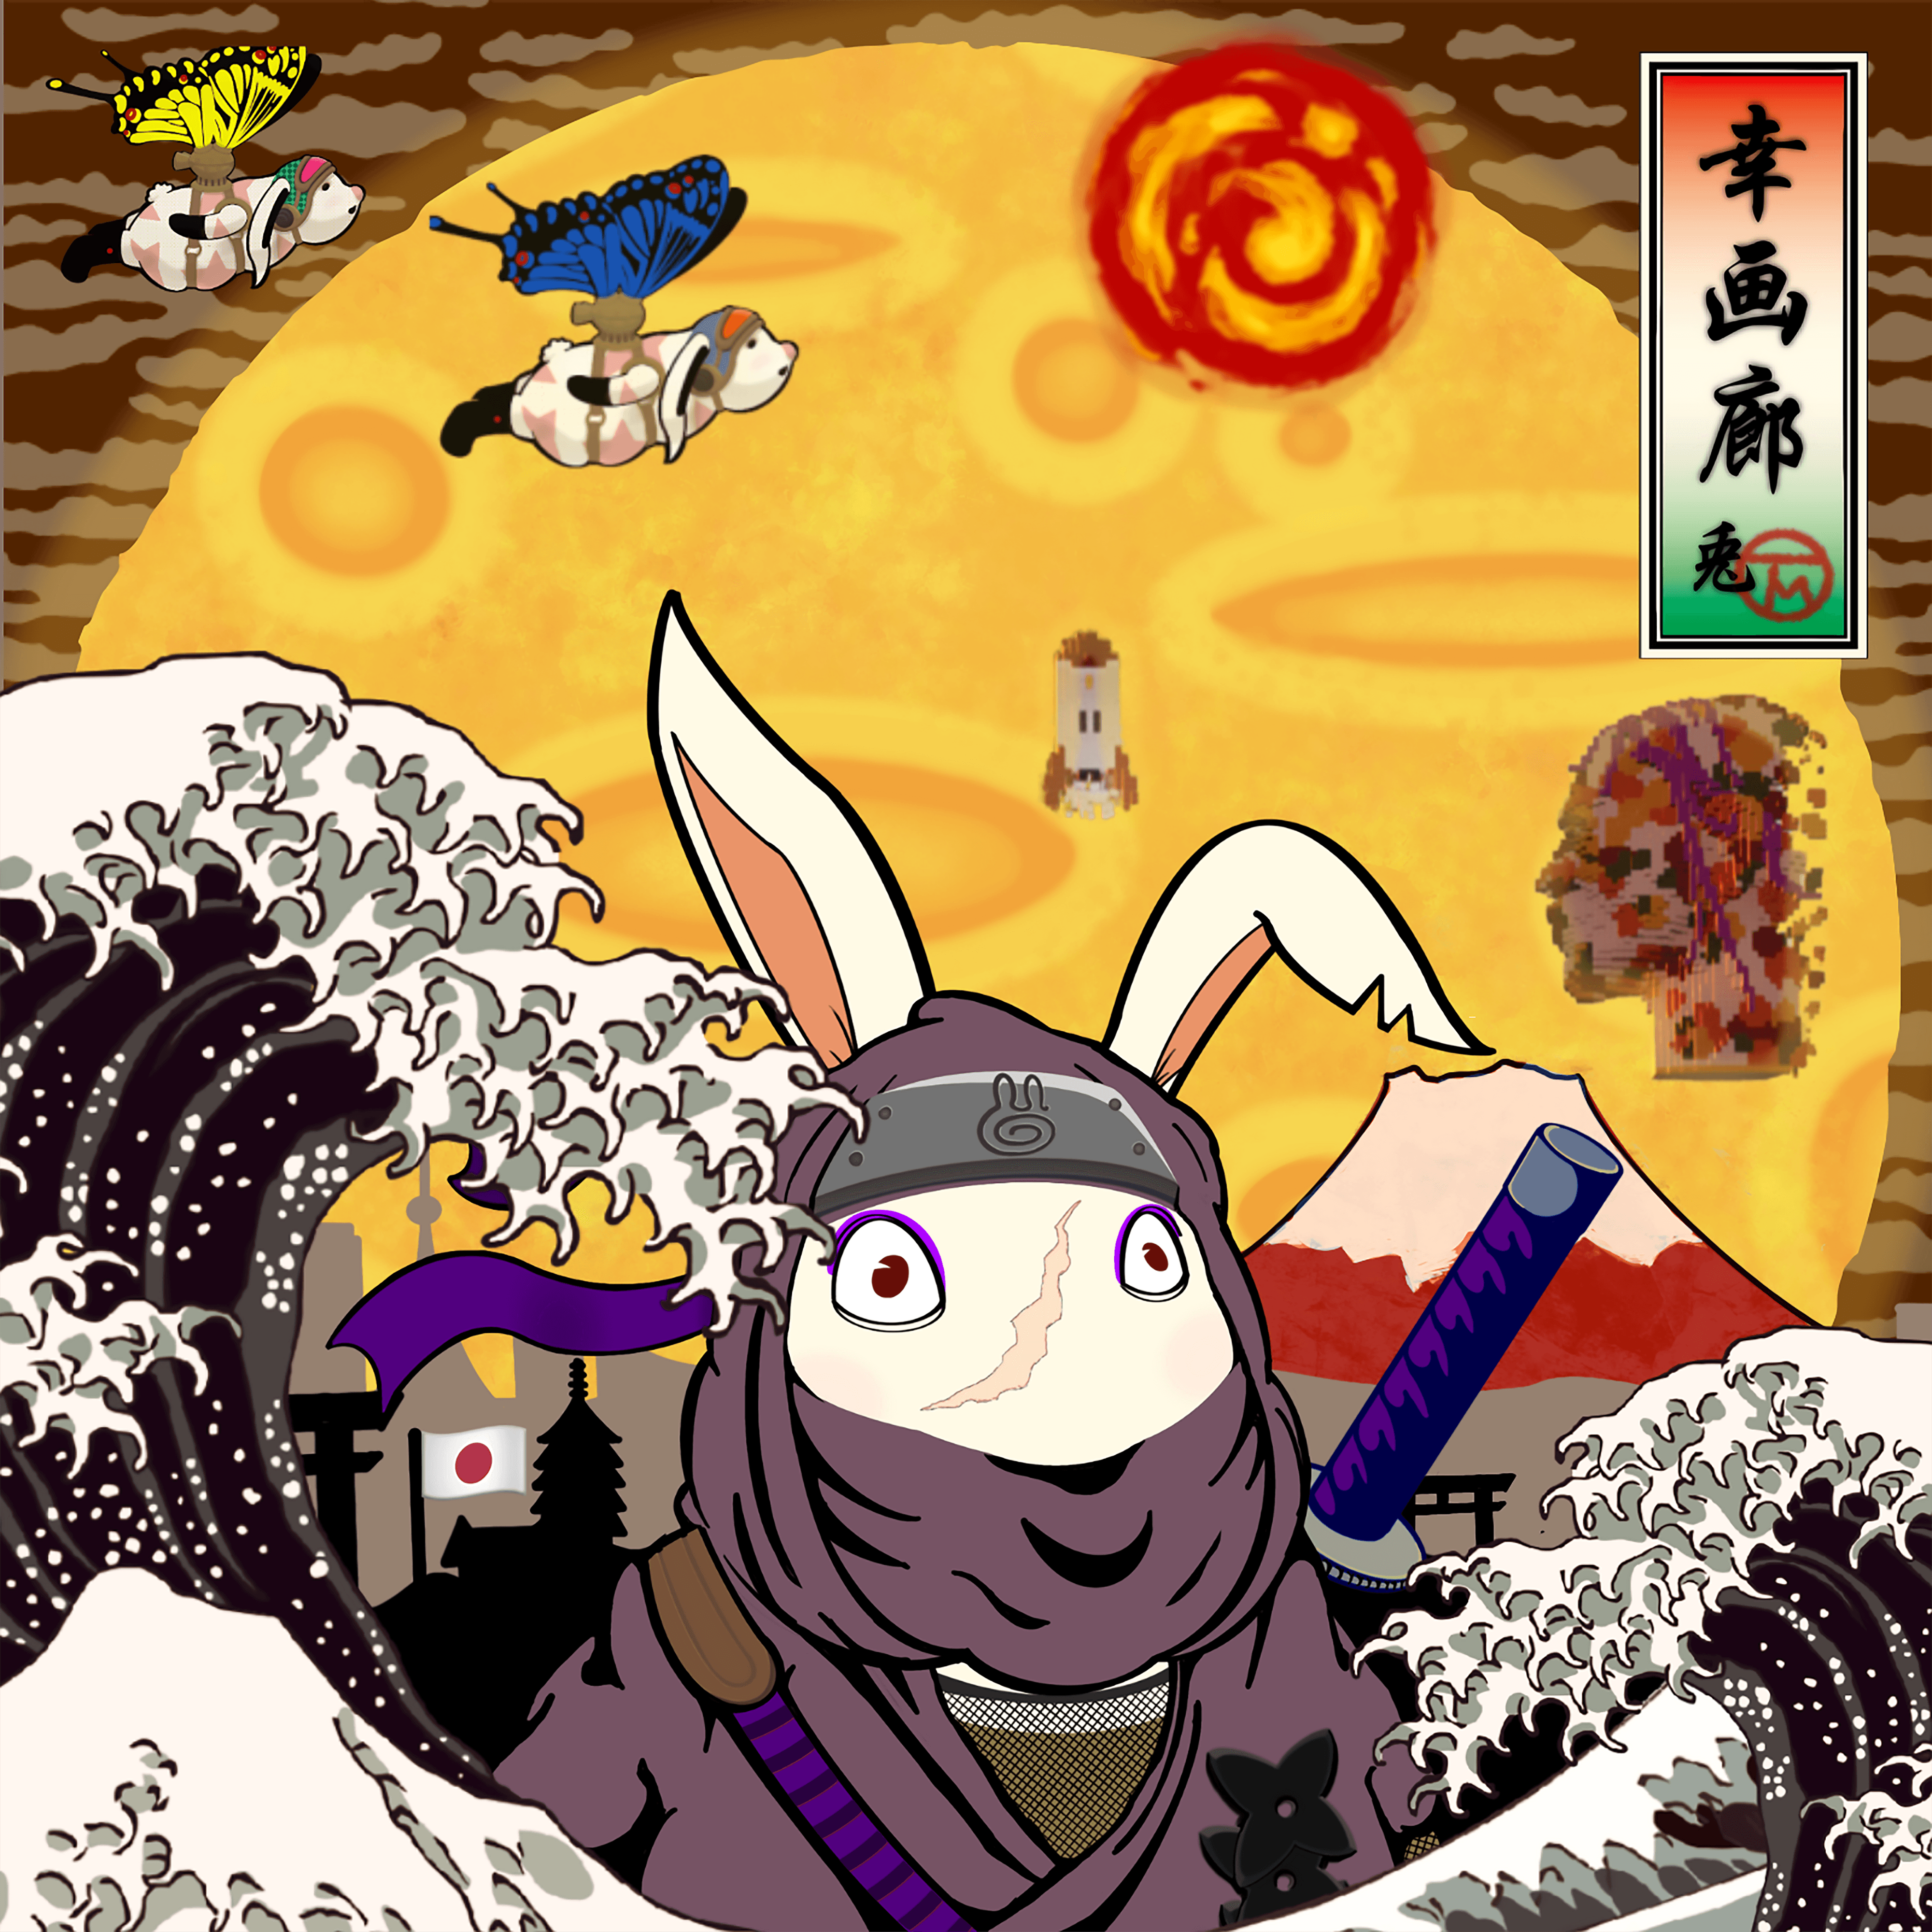 KUNOICHI The Rabbit meets TheHappyGallery